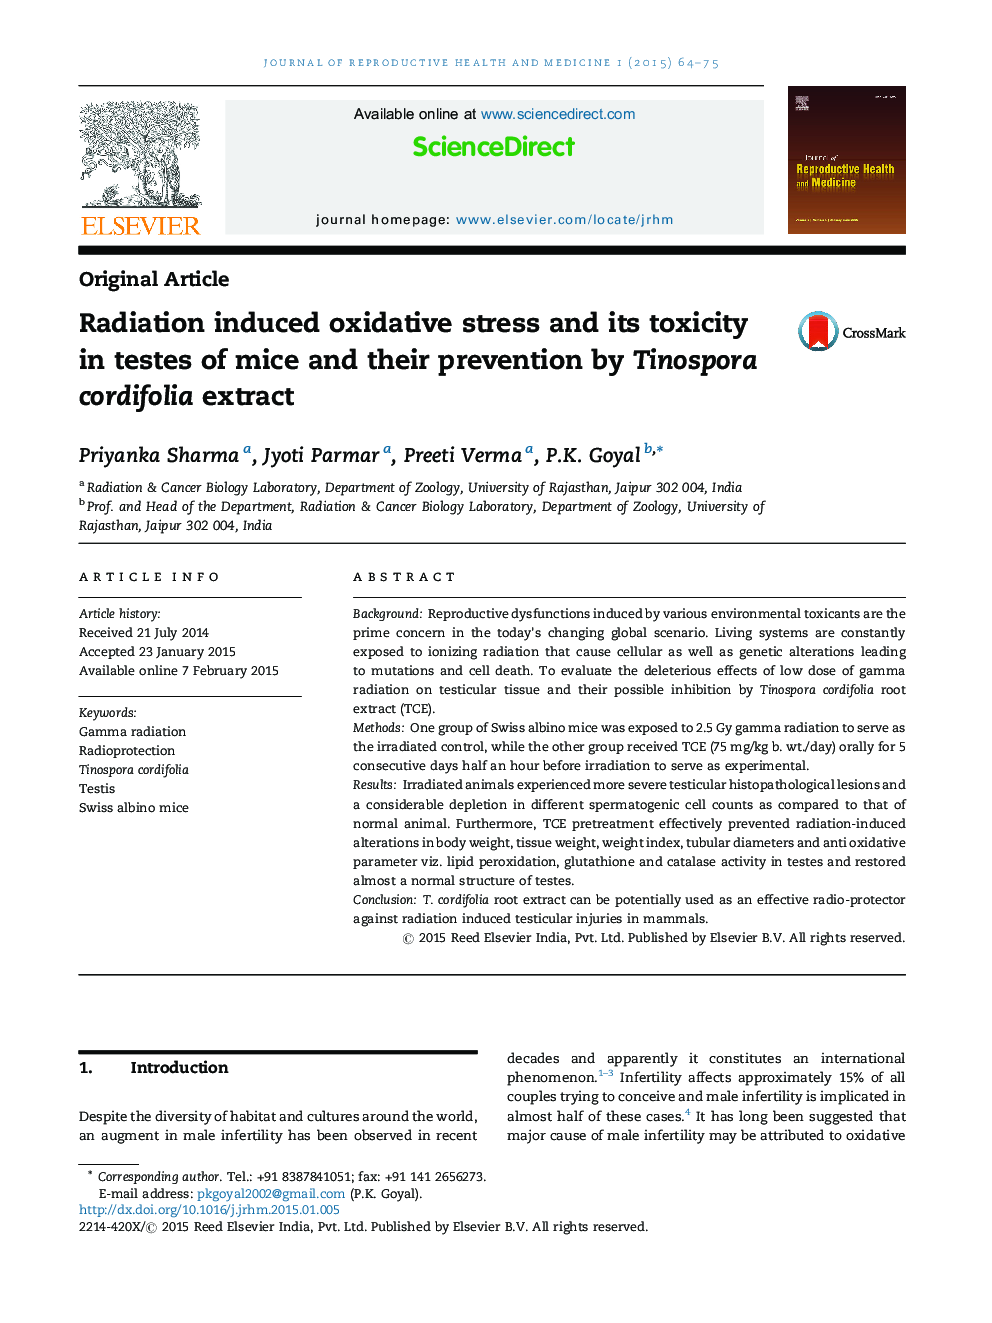 Radiation induced oxidative stress and its toxicity in testes of mice and their prevention by Tinospora cordifolia extract